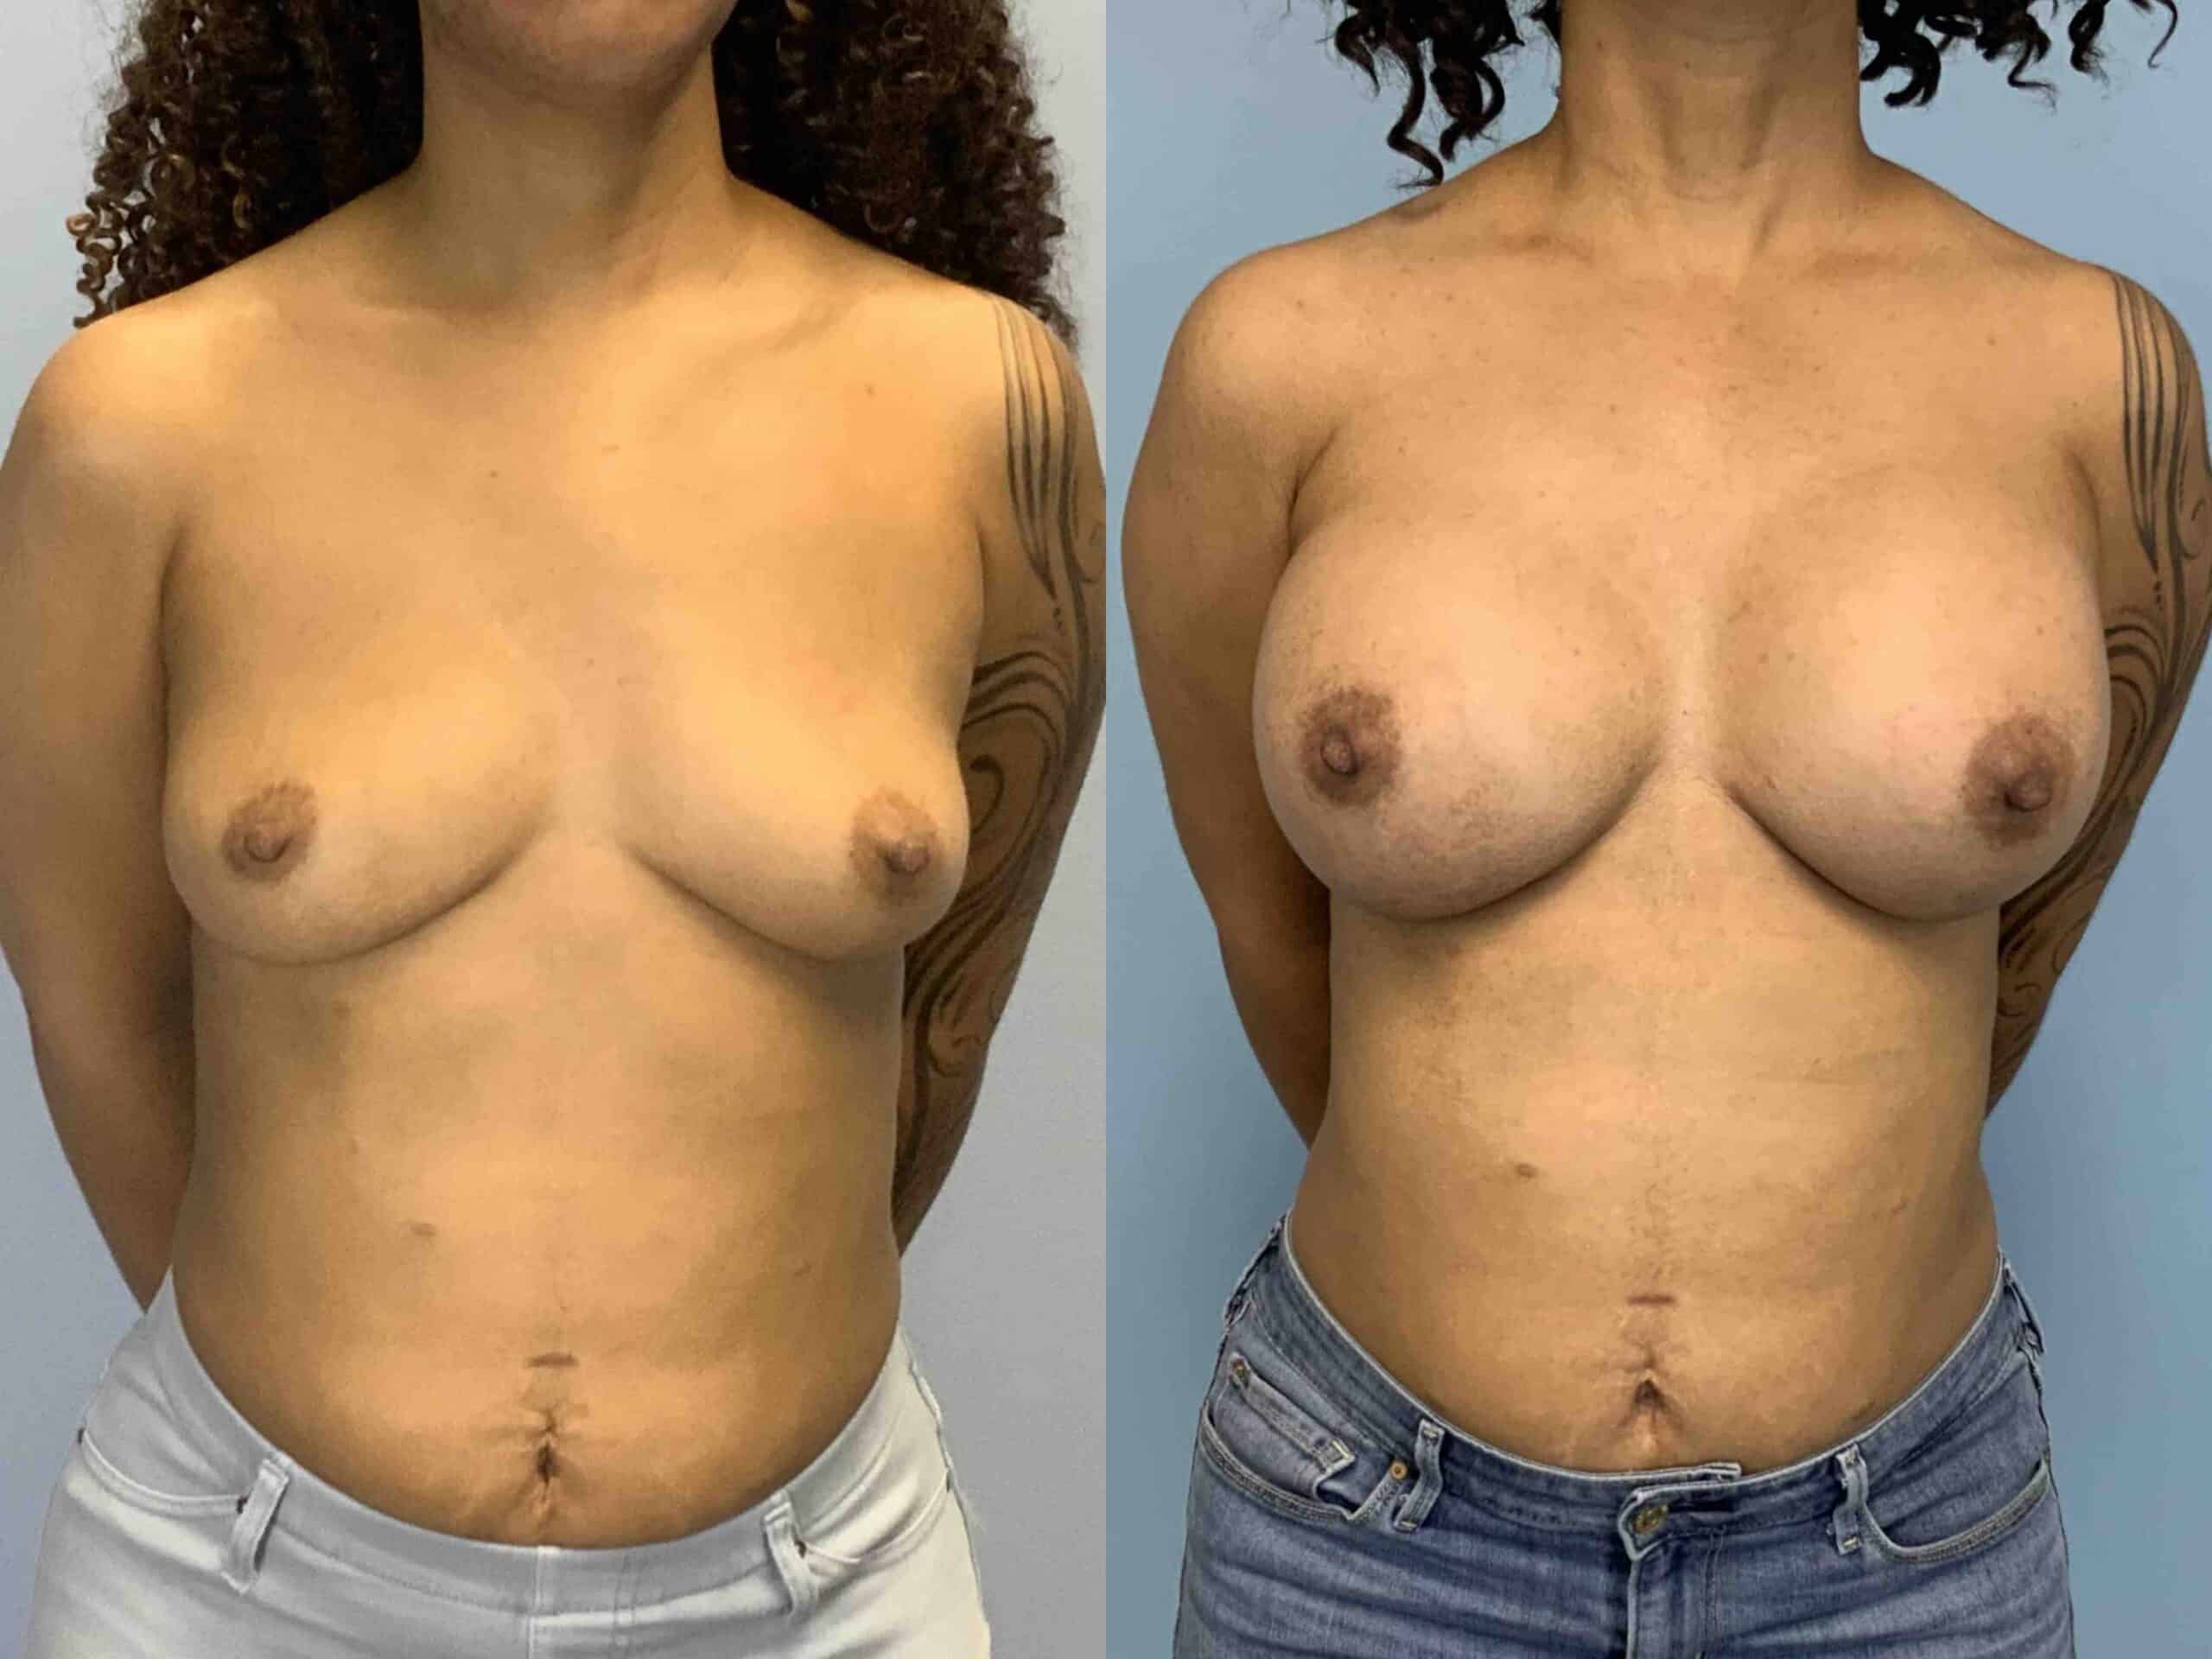 Before and after, patient 2 mo post op from Breast Augmentation and Level III Muscle Release procedures performed by Dr. Paul Vanek